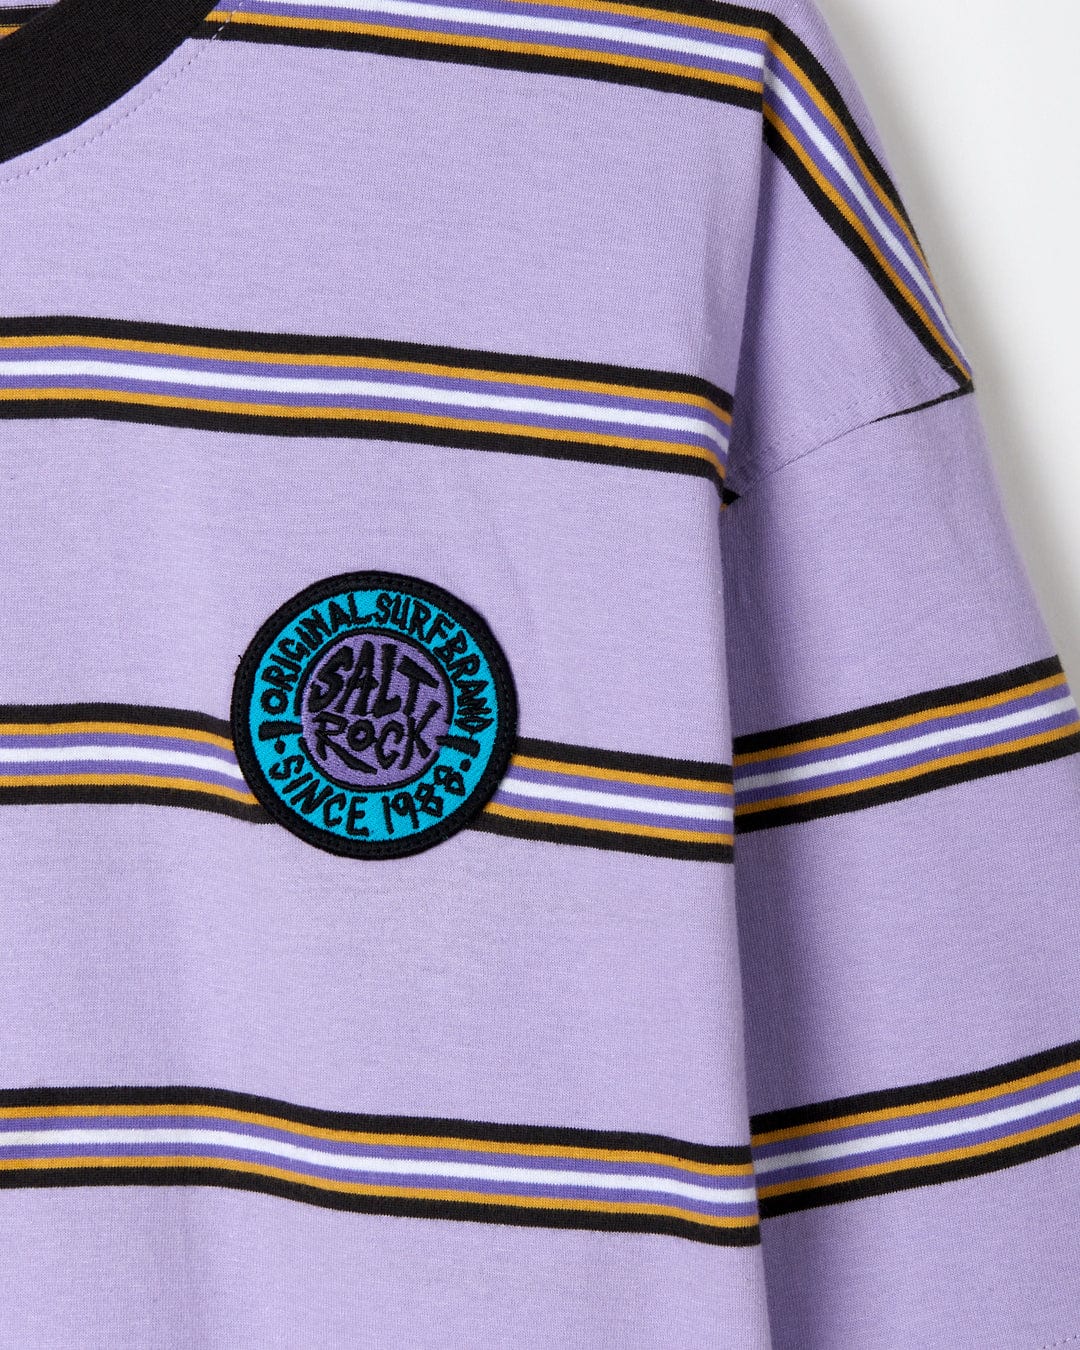 Striped purple and black Saltrock oversized t-shirt with a circular brand patch on the sleeve.